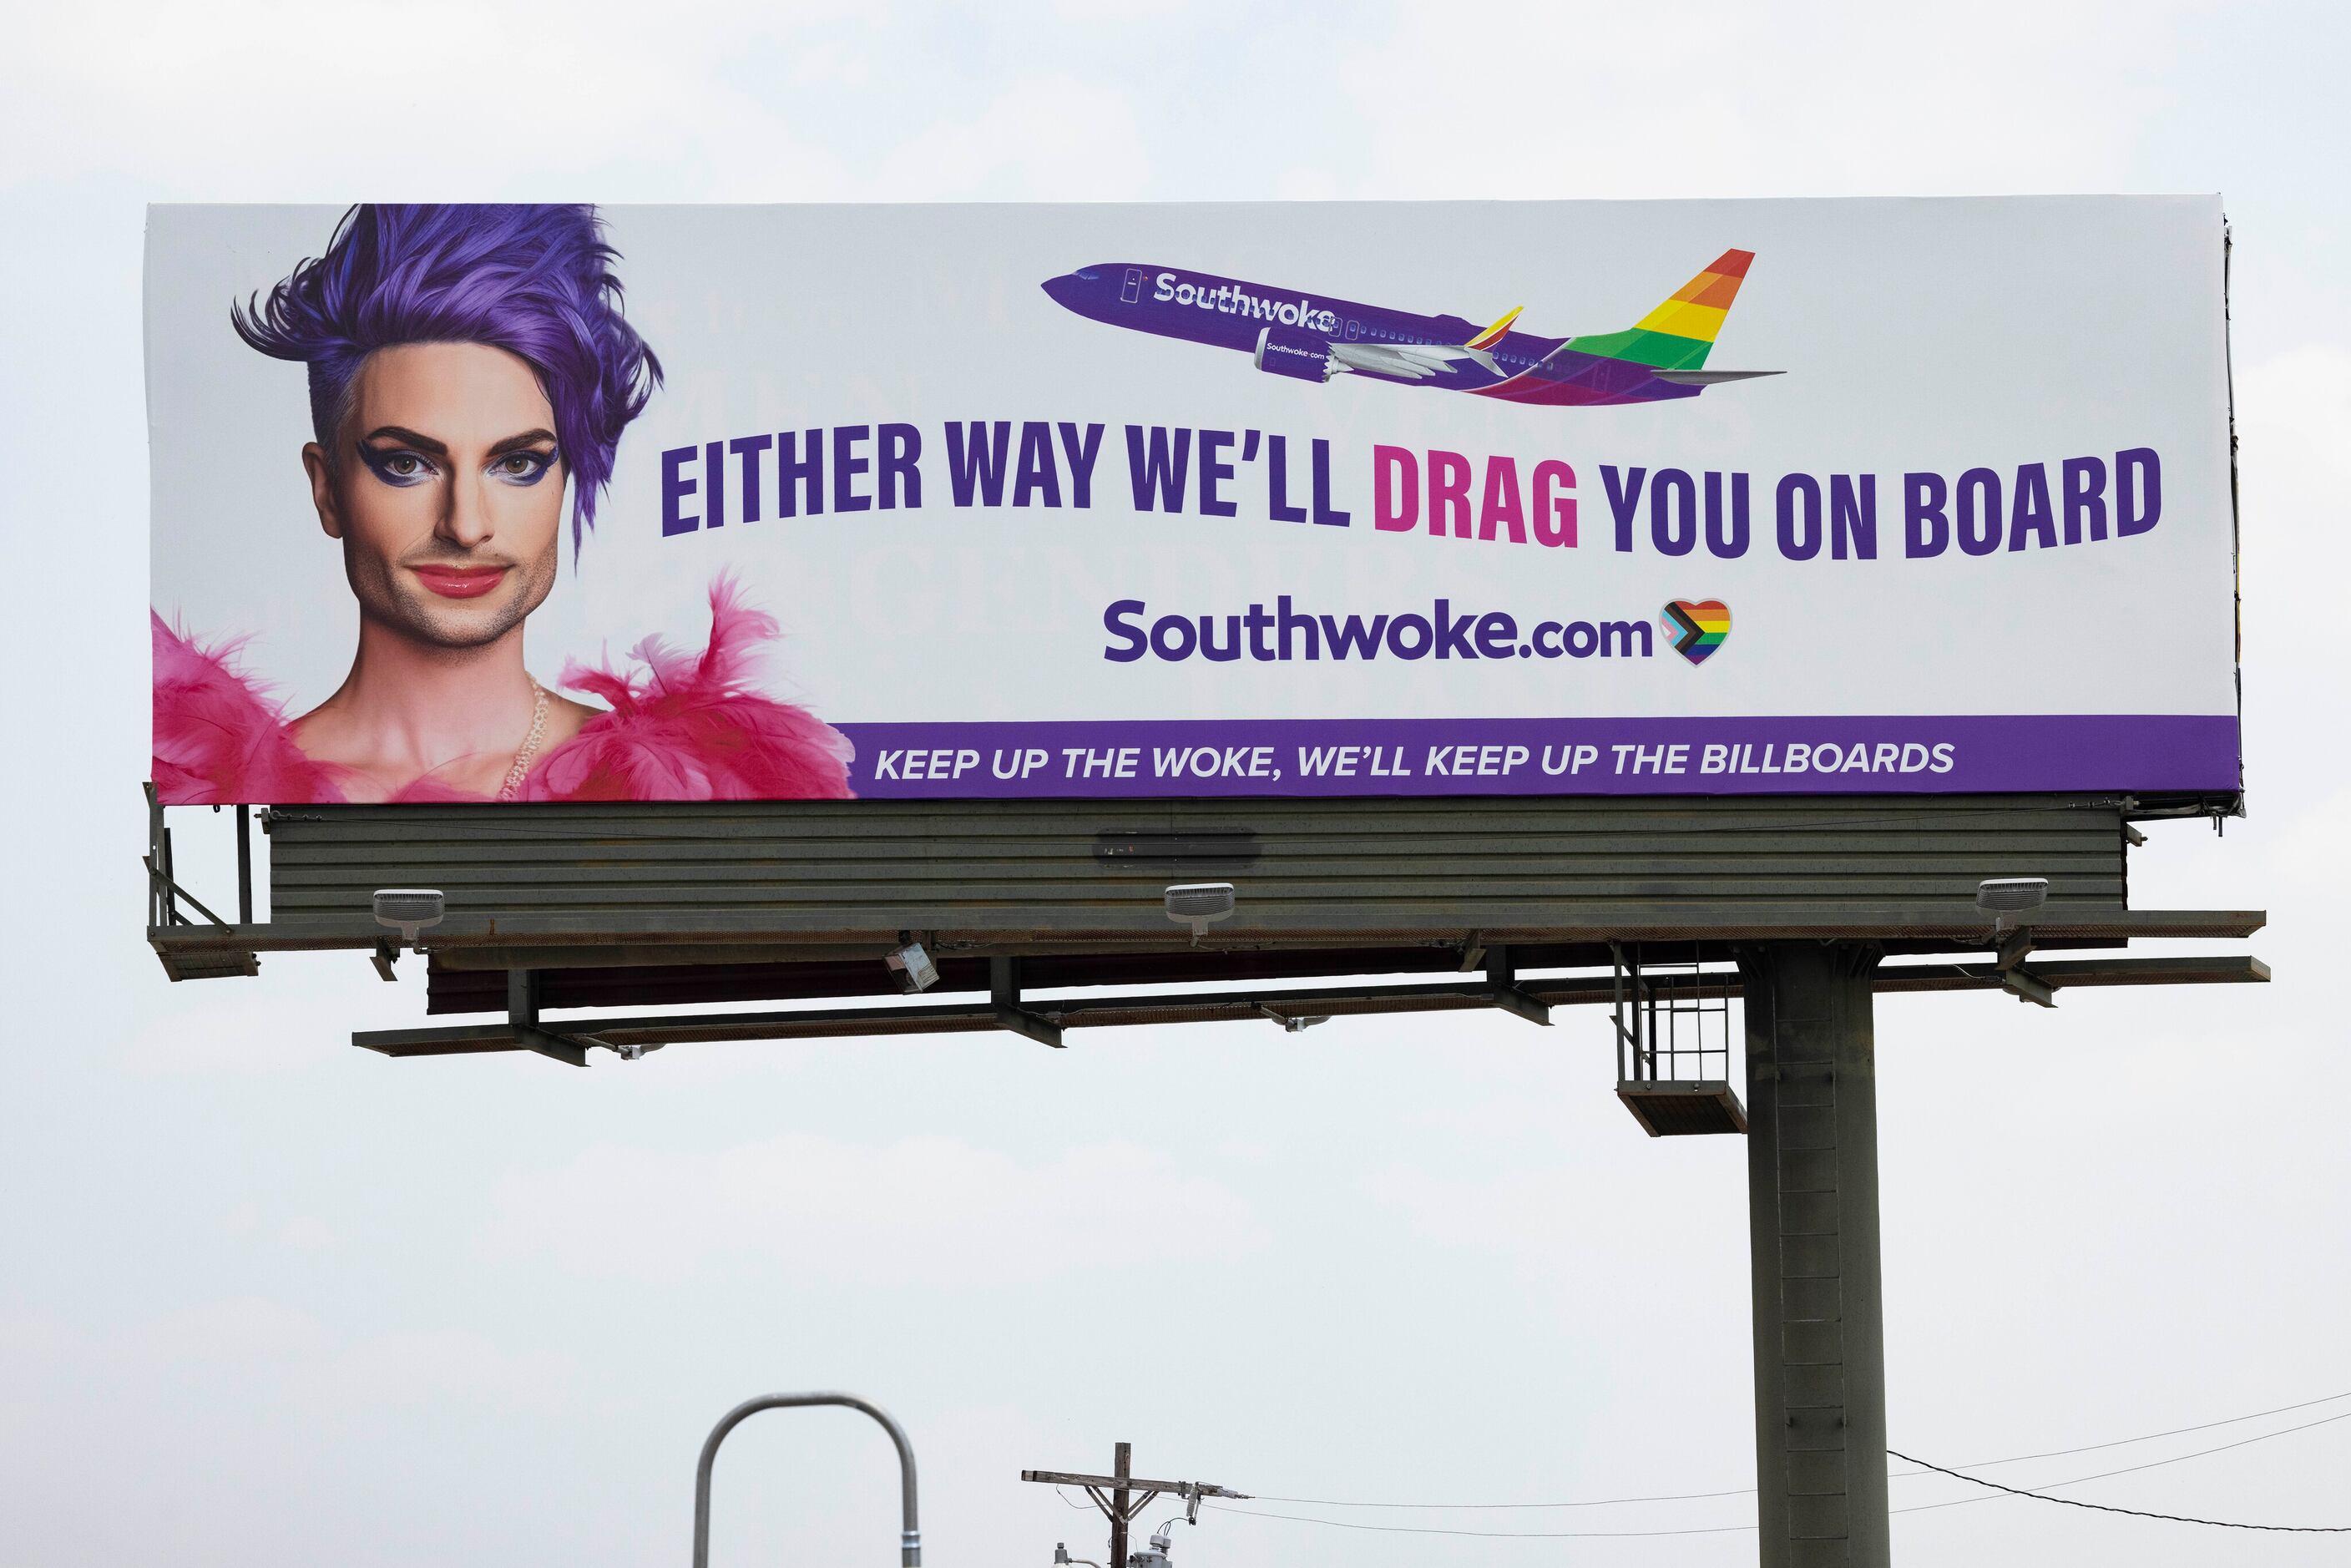 Bai on X: Hey @SouthwestAir you let your employees sexualize 19